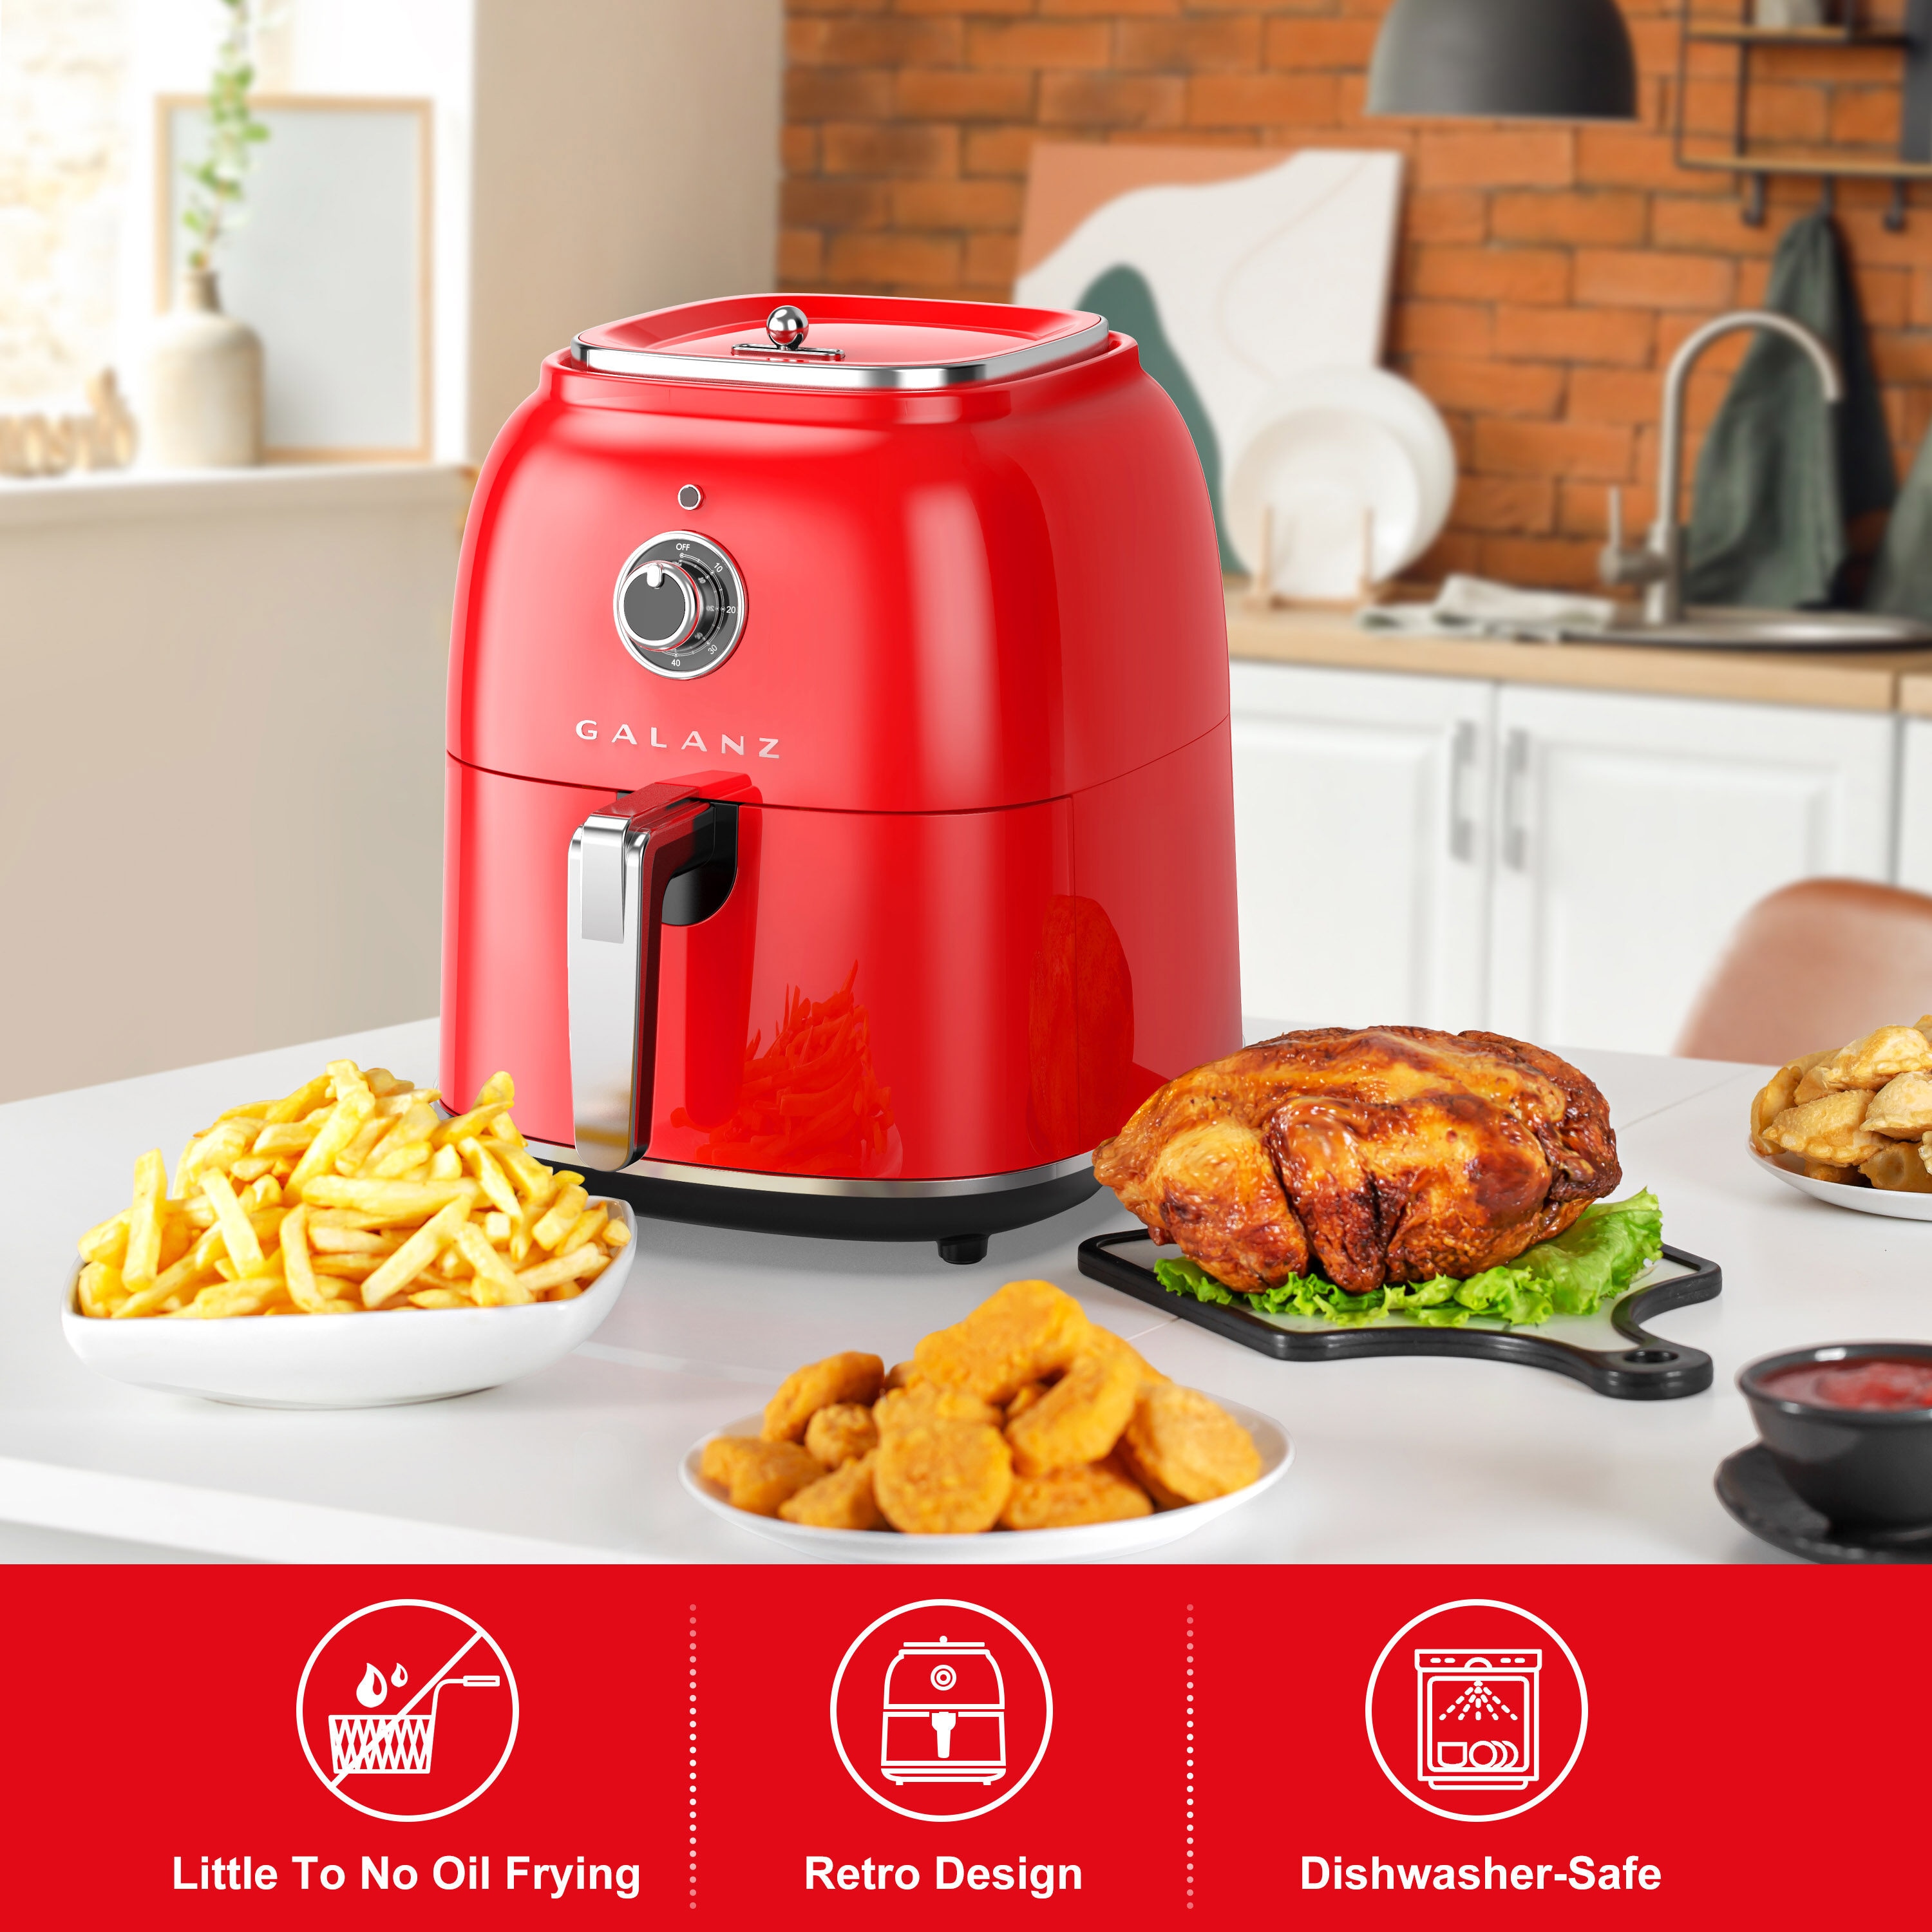 Galanz Retro Red Air Fryer 1500W, Removable Fry Basket, ETL Listed